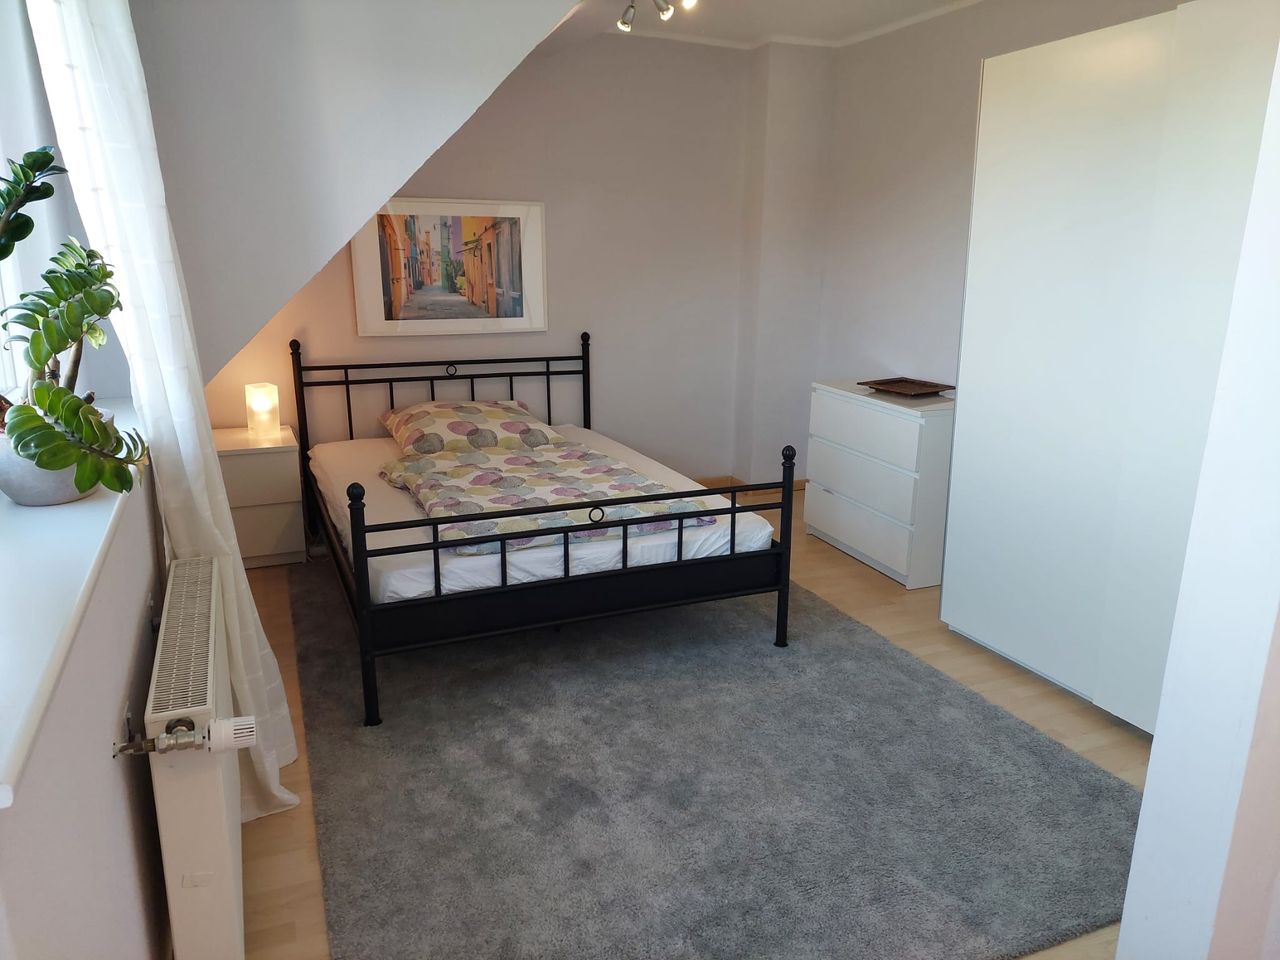 Central and Quiet. Cozy 2.5 room apartment in the center of Leverkusen (near Cologne).